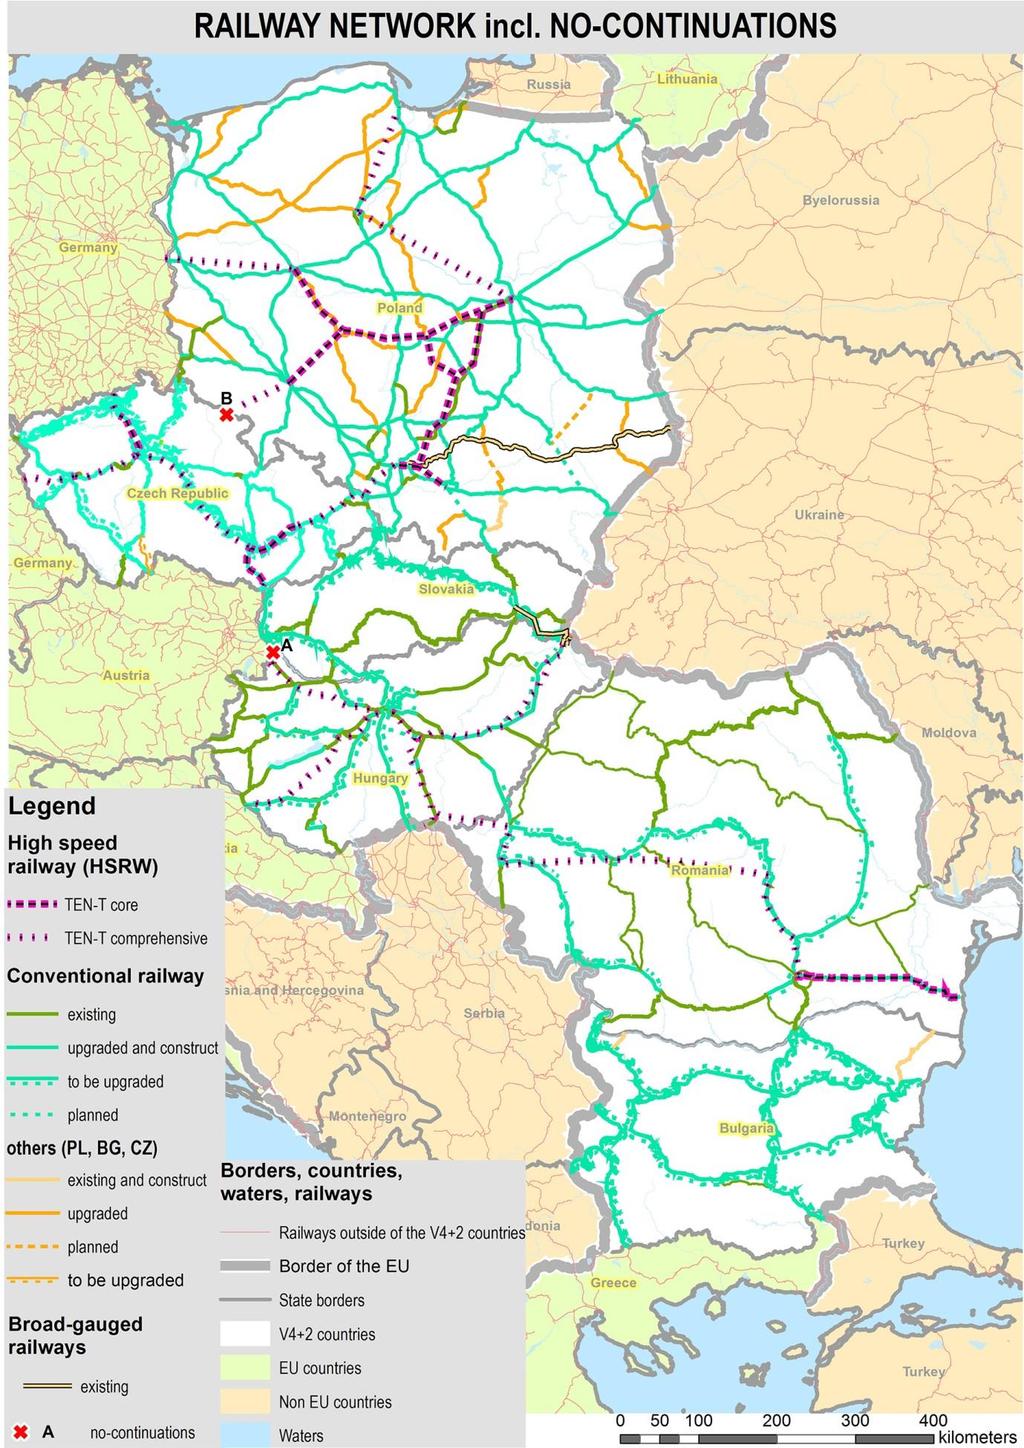 Figure 2: Delineation of railway networks on the territory of